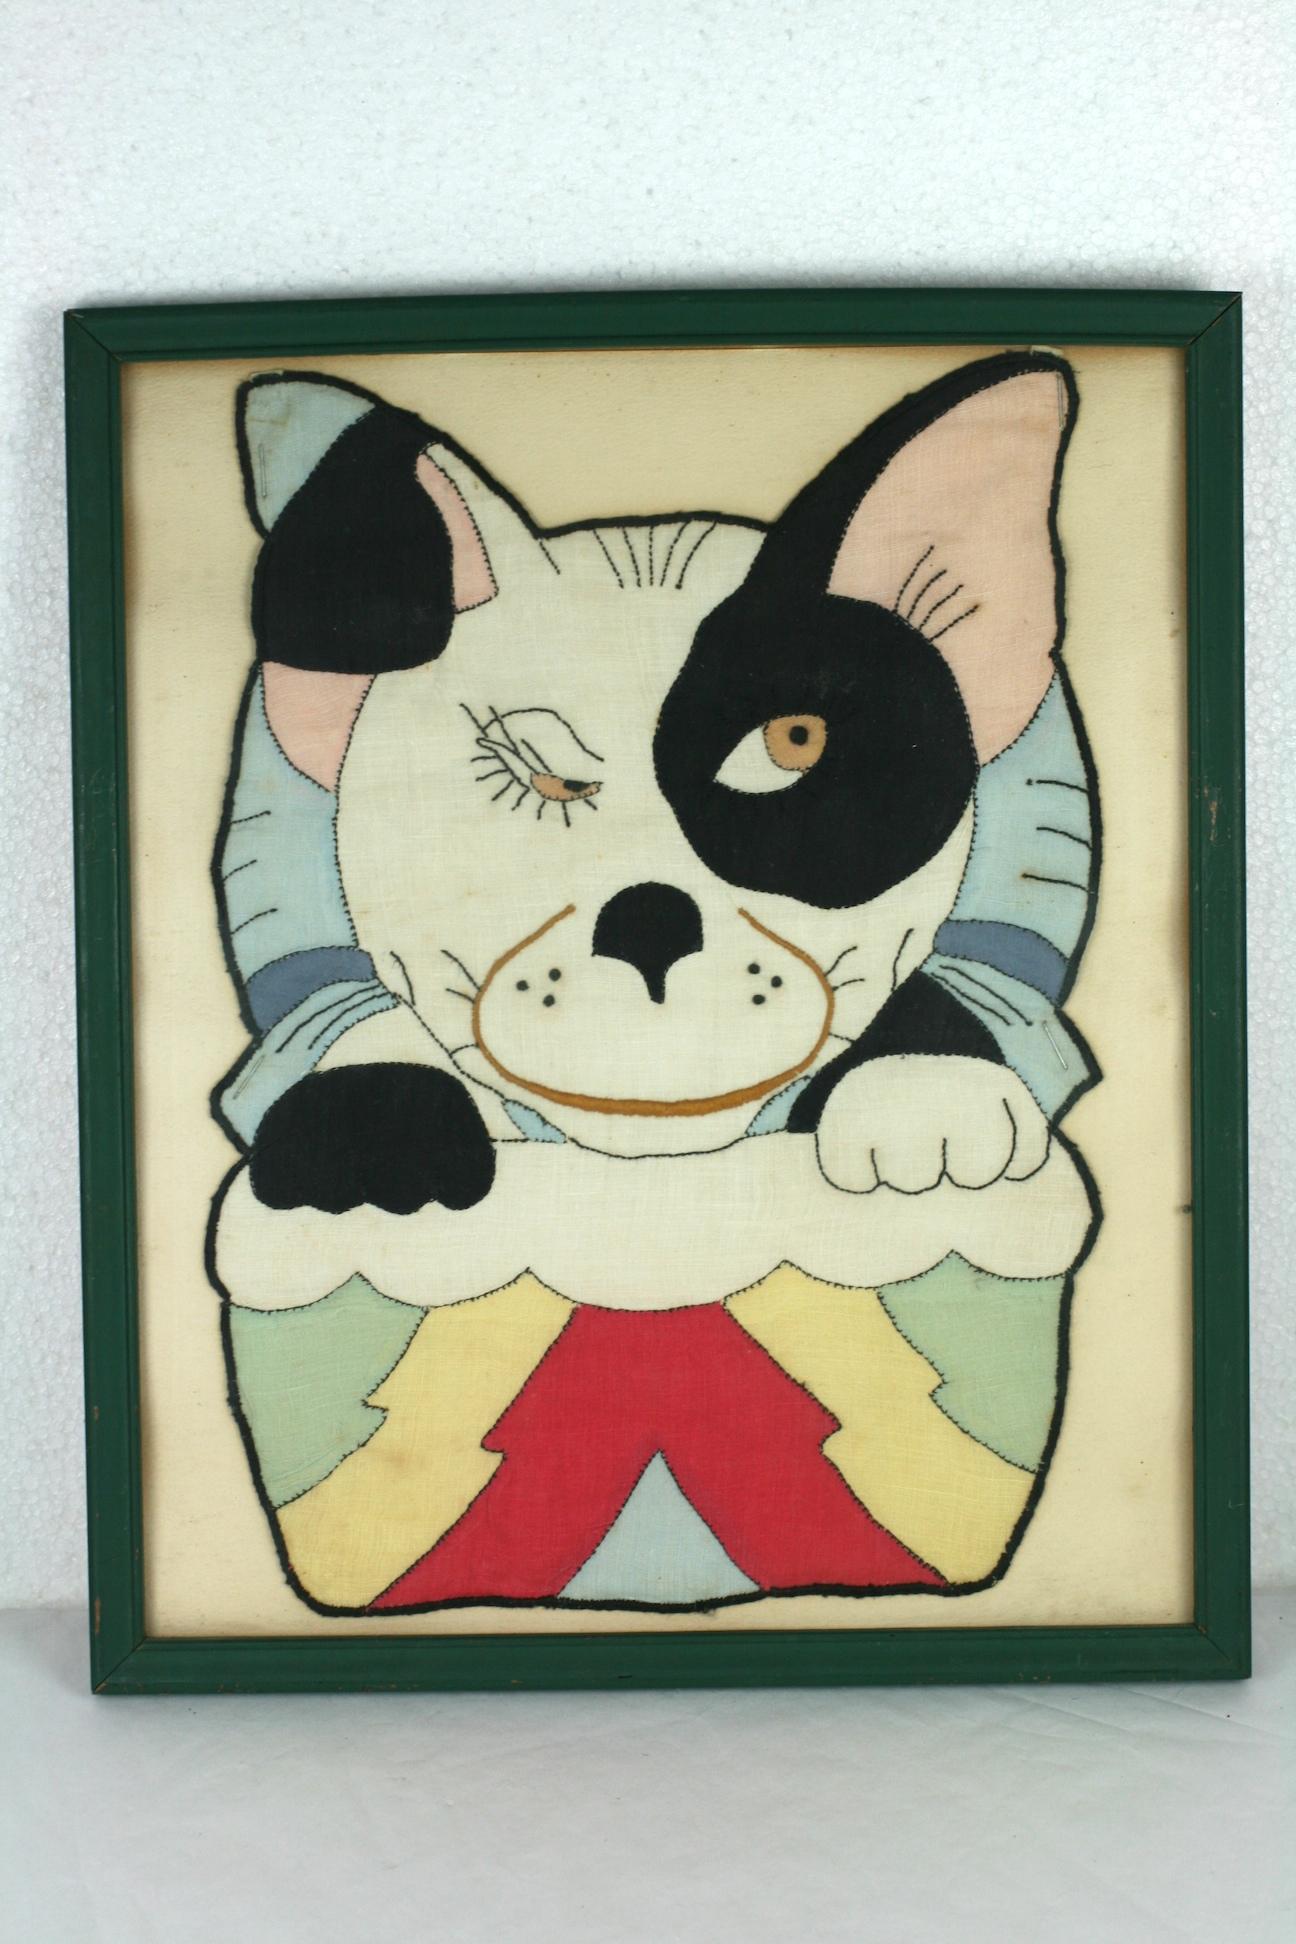 Pair of Art Deco embroidered baby bib pictures from the 1930s. Amazingly graphic embroidered and pieced colored linen baby bibs in the form of cat in clown costume and a dog in an Art Deco bed.
Beautifully detailed and designed for use! By babies